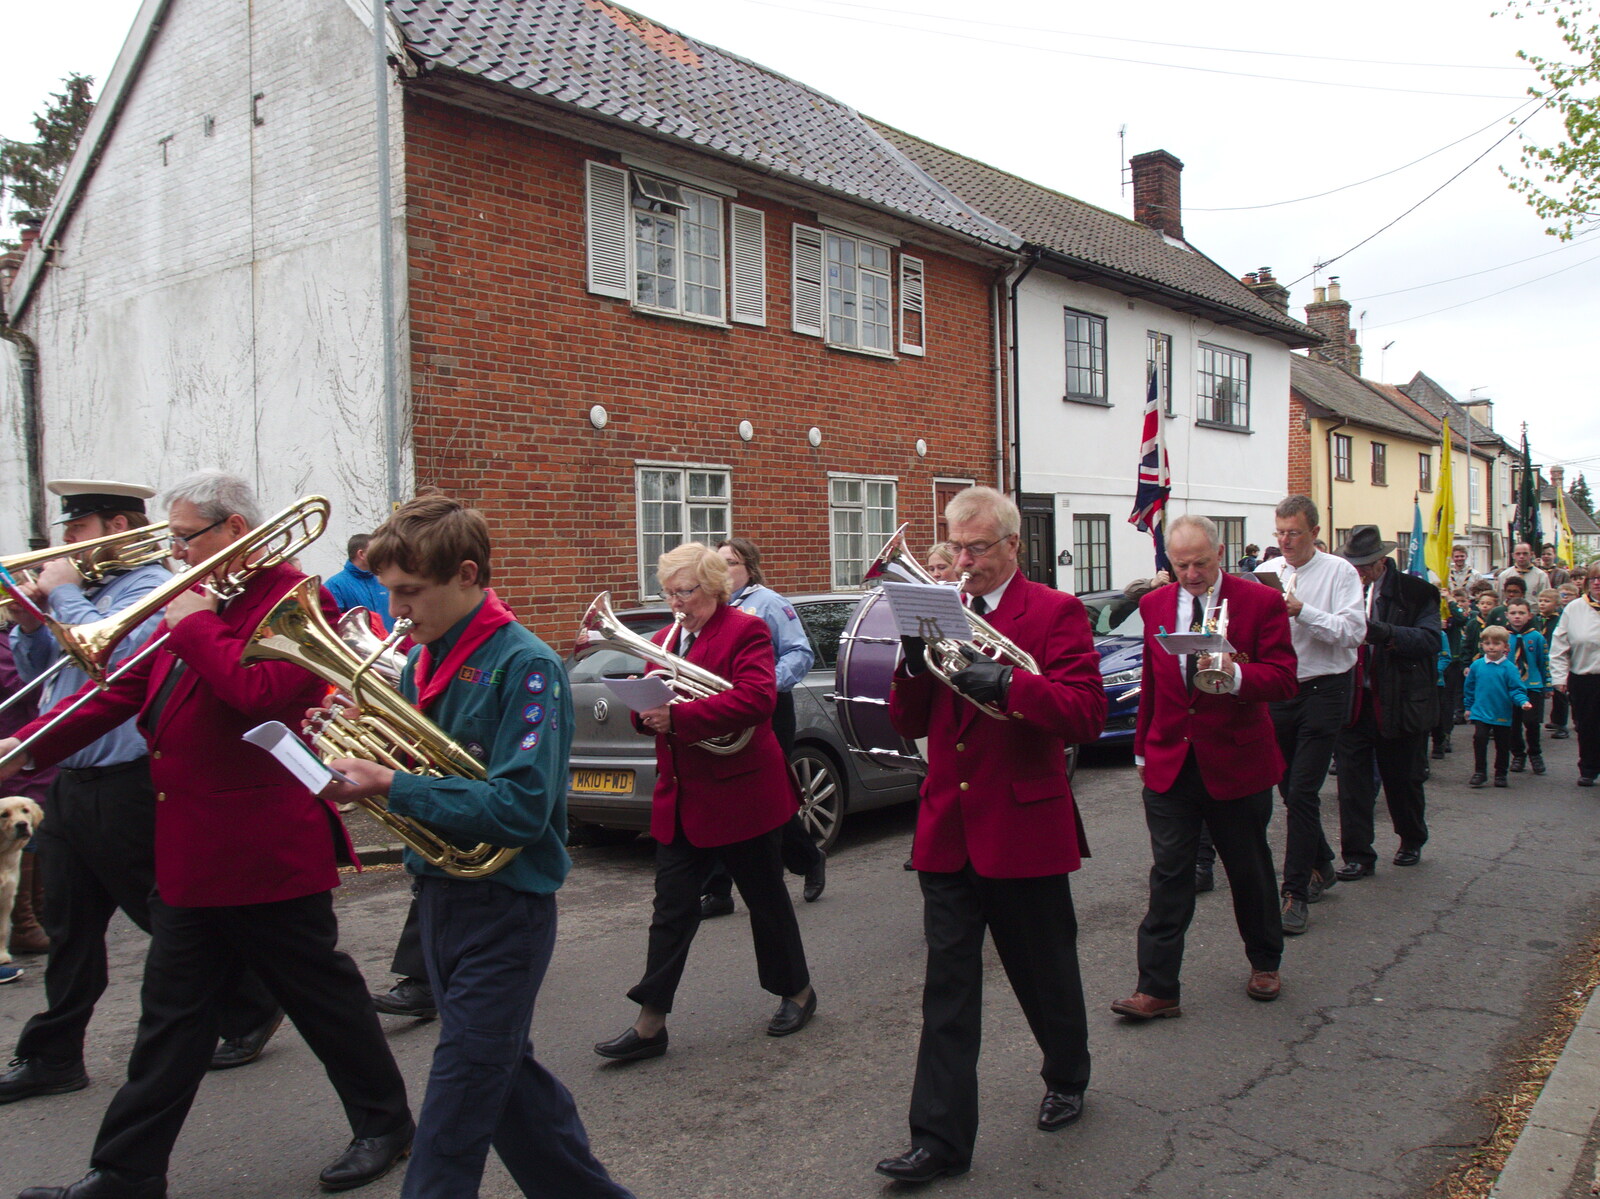 The band marches through Dickleburgh from A St. George's Day Parade, Dickleburgh, Norfolk - 28th April 2019